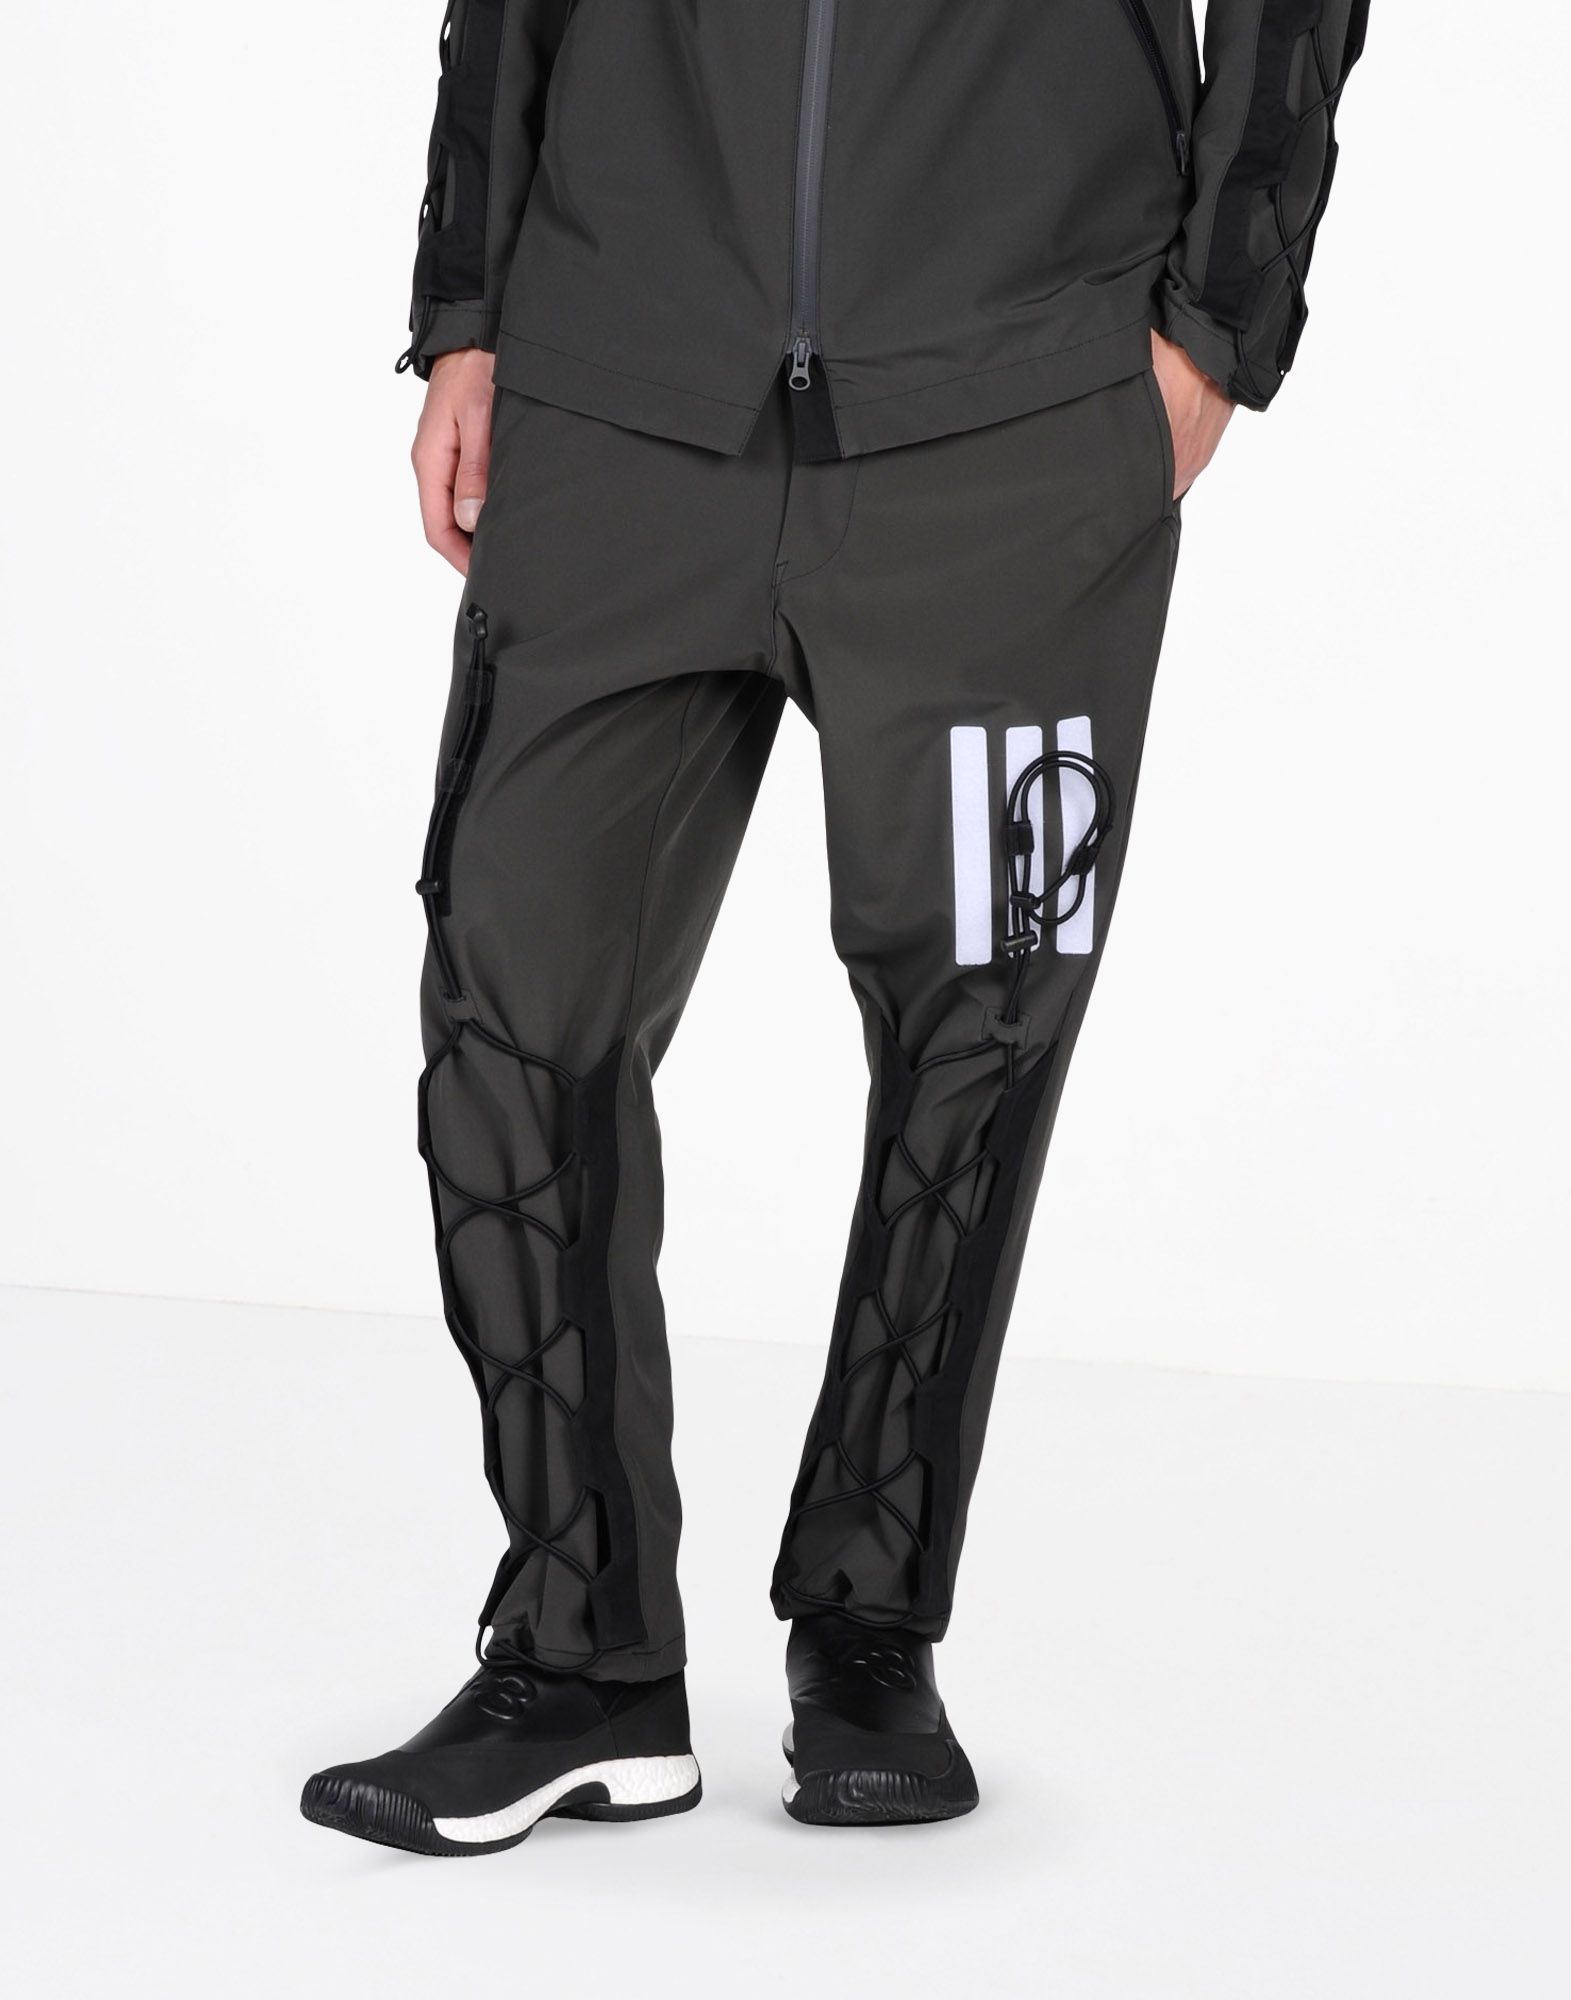 Y 3 3 LAYER PANT for Men | Adidas Y-3 Official Store